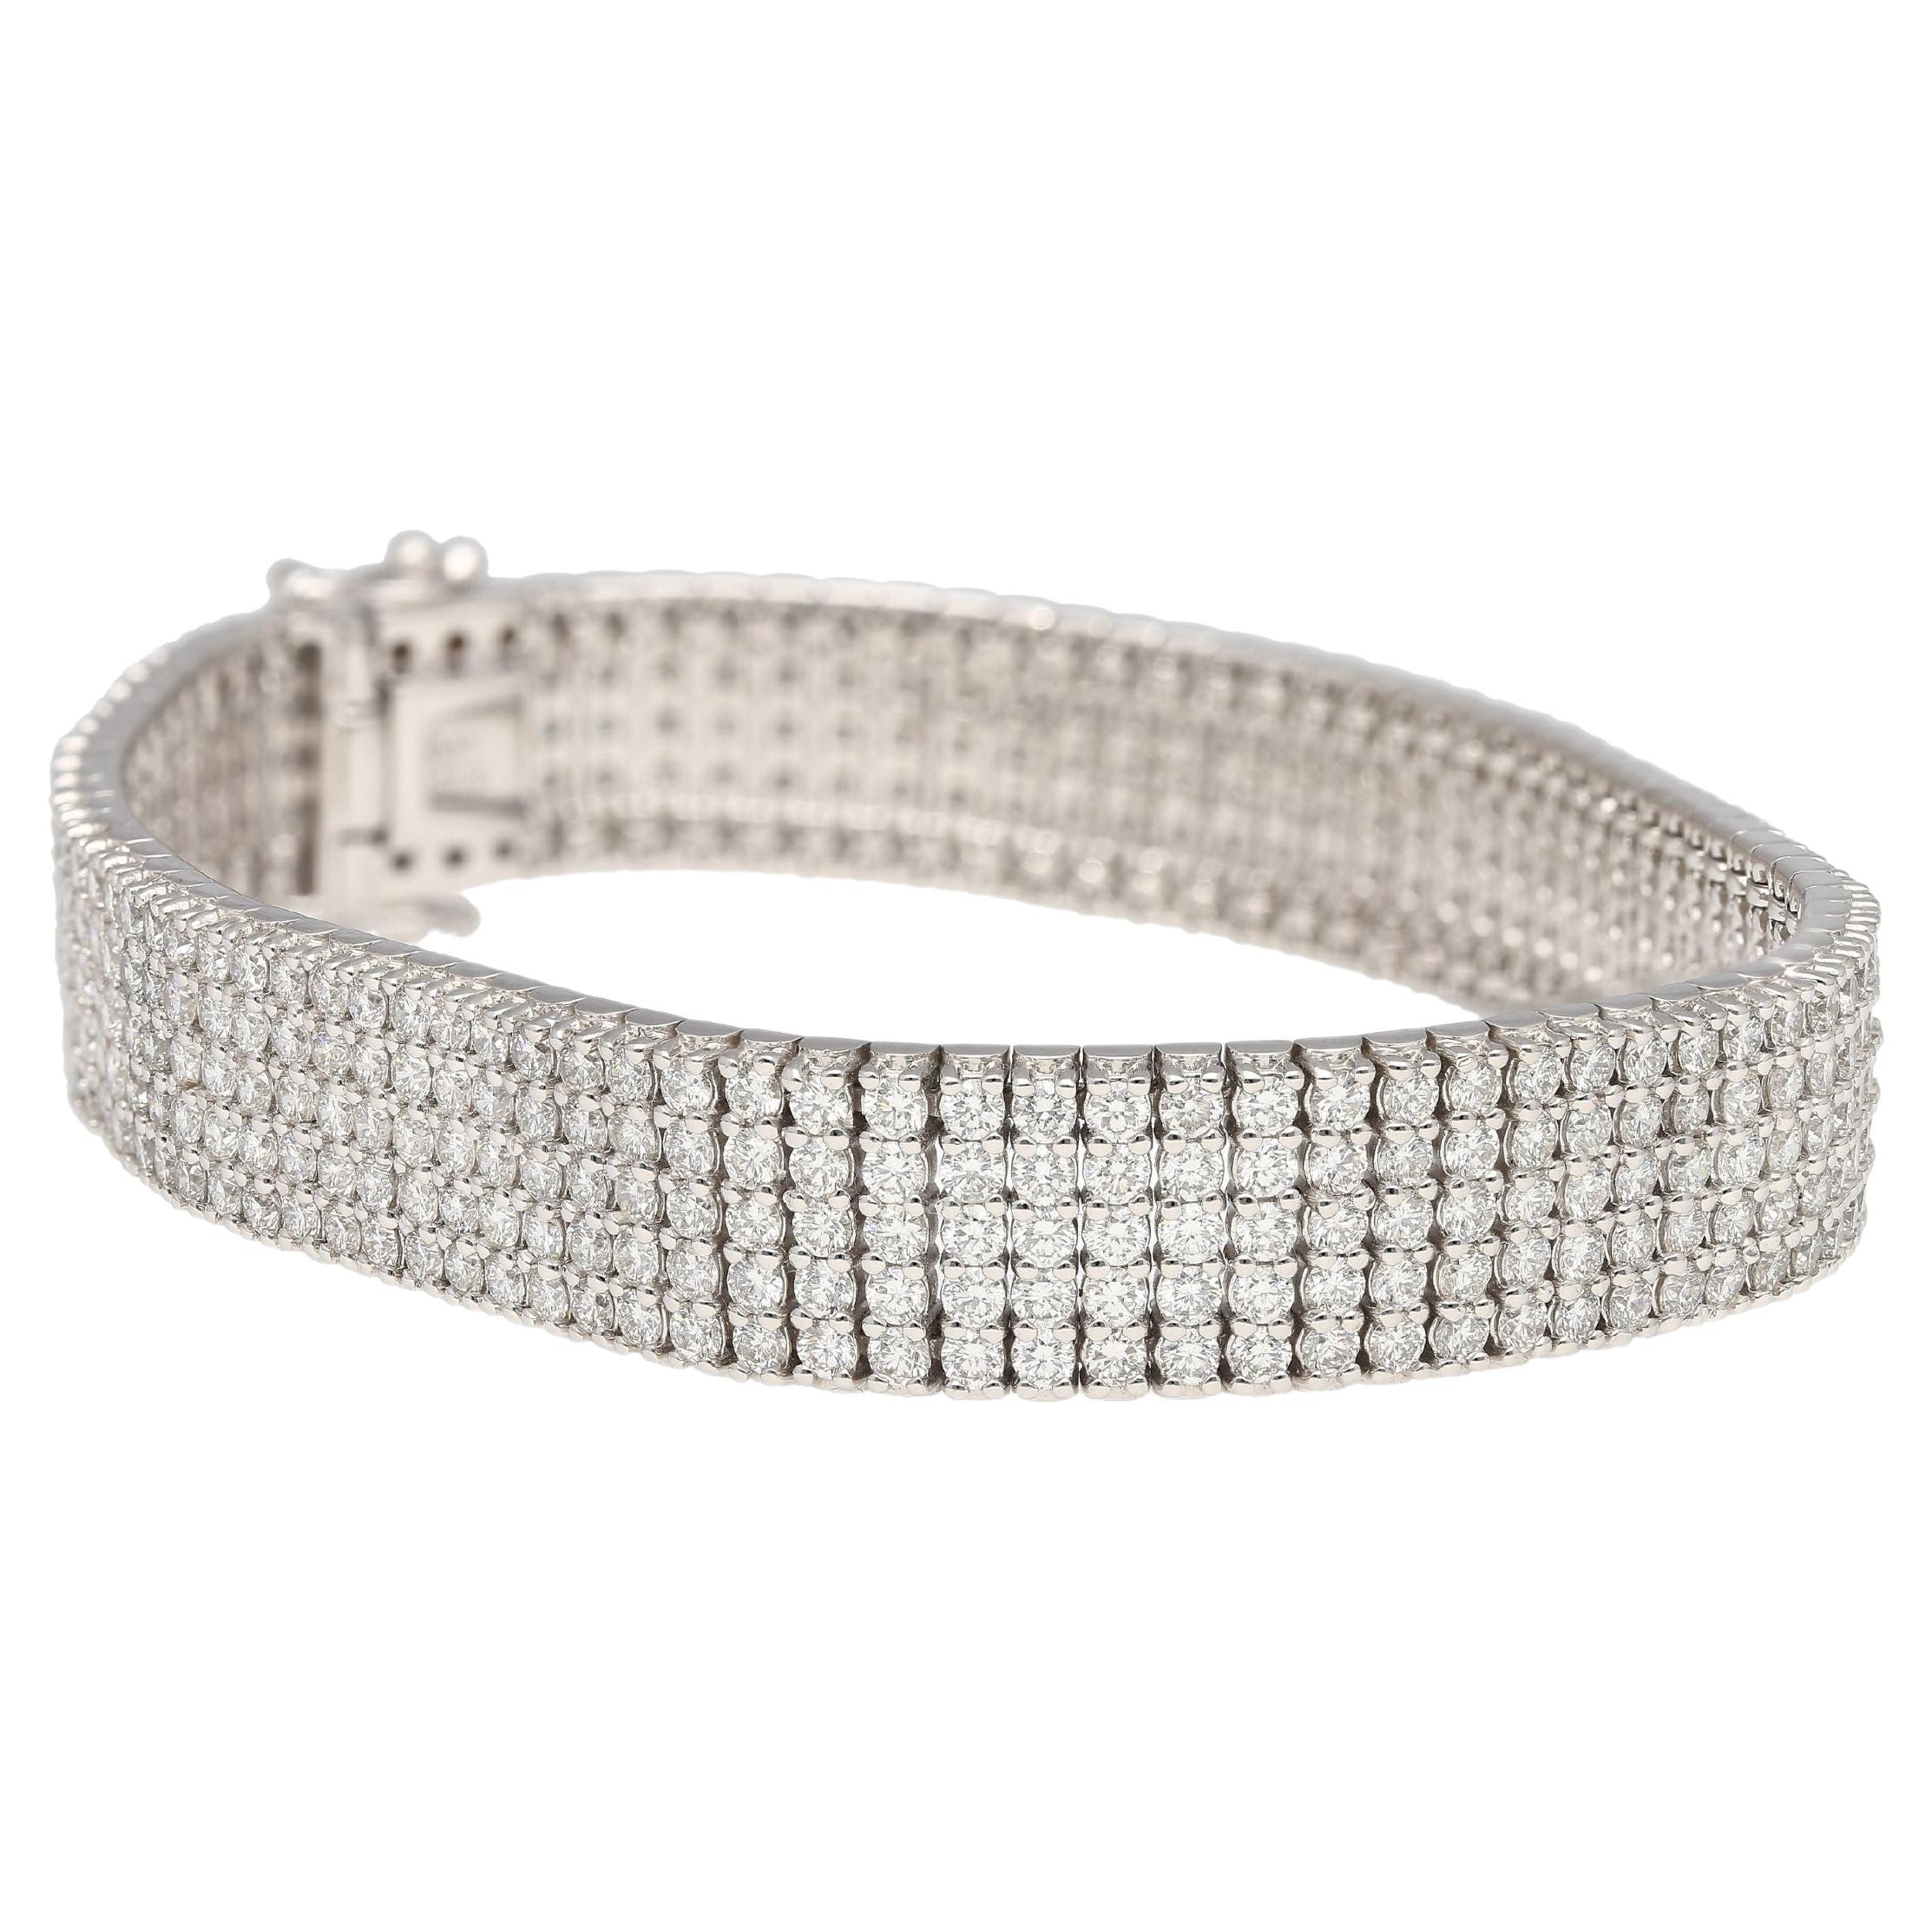 Crafted in 18K white gold and showcasing a total weight of 9.32 carats of round brilliant cut natural diamonds.

The bracelet features a secure box closure, ensuring peace of mind while adorning your wrist. Its good width provides a substantial